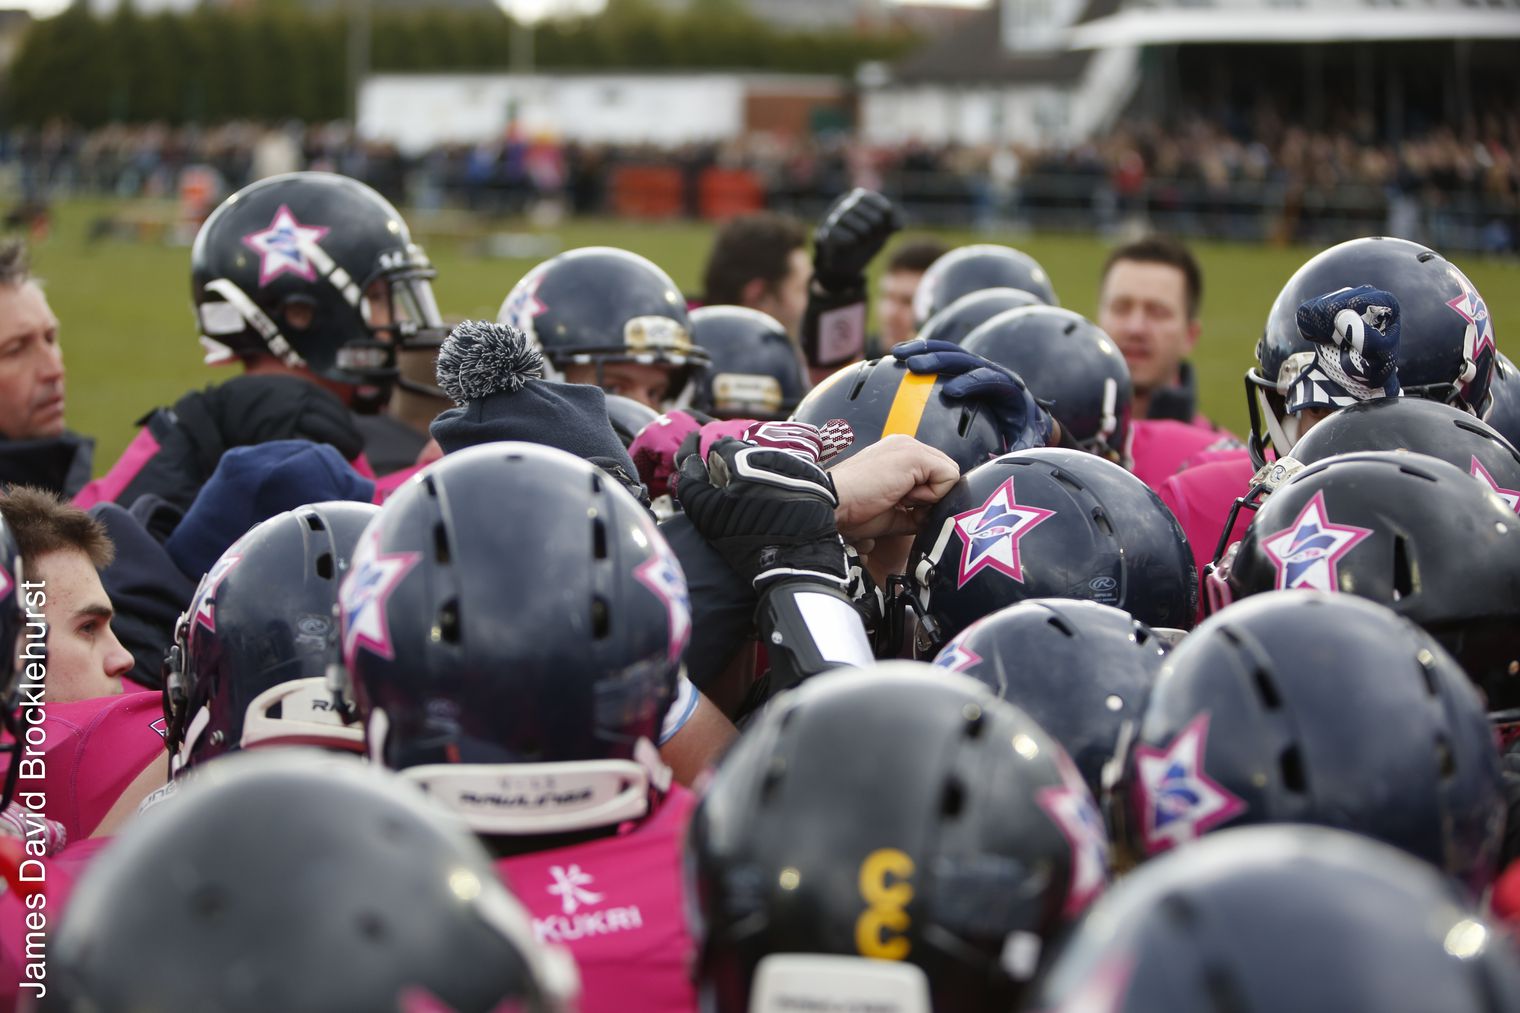 American Football in the UK Part 2: Learning to play as an adult - Hogs